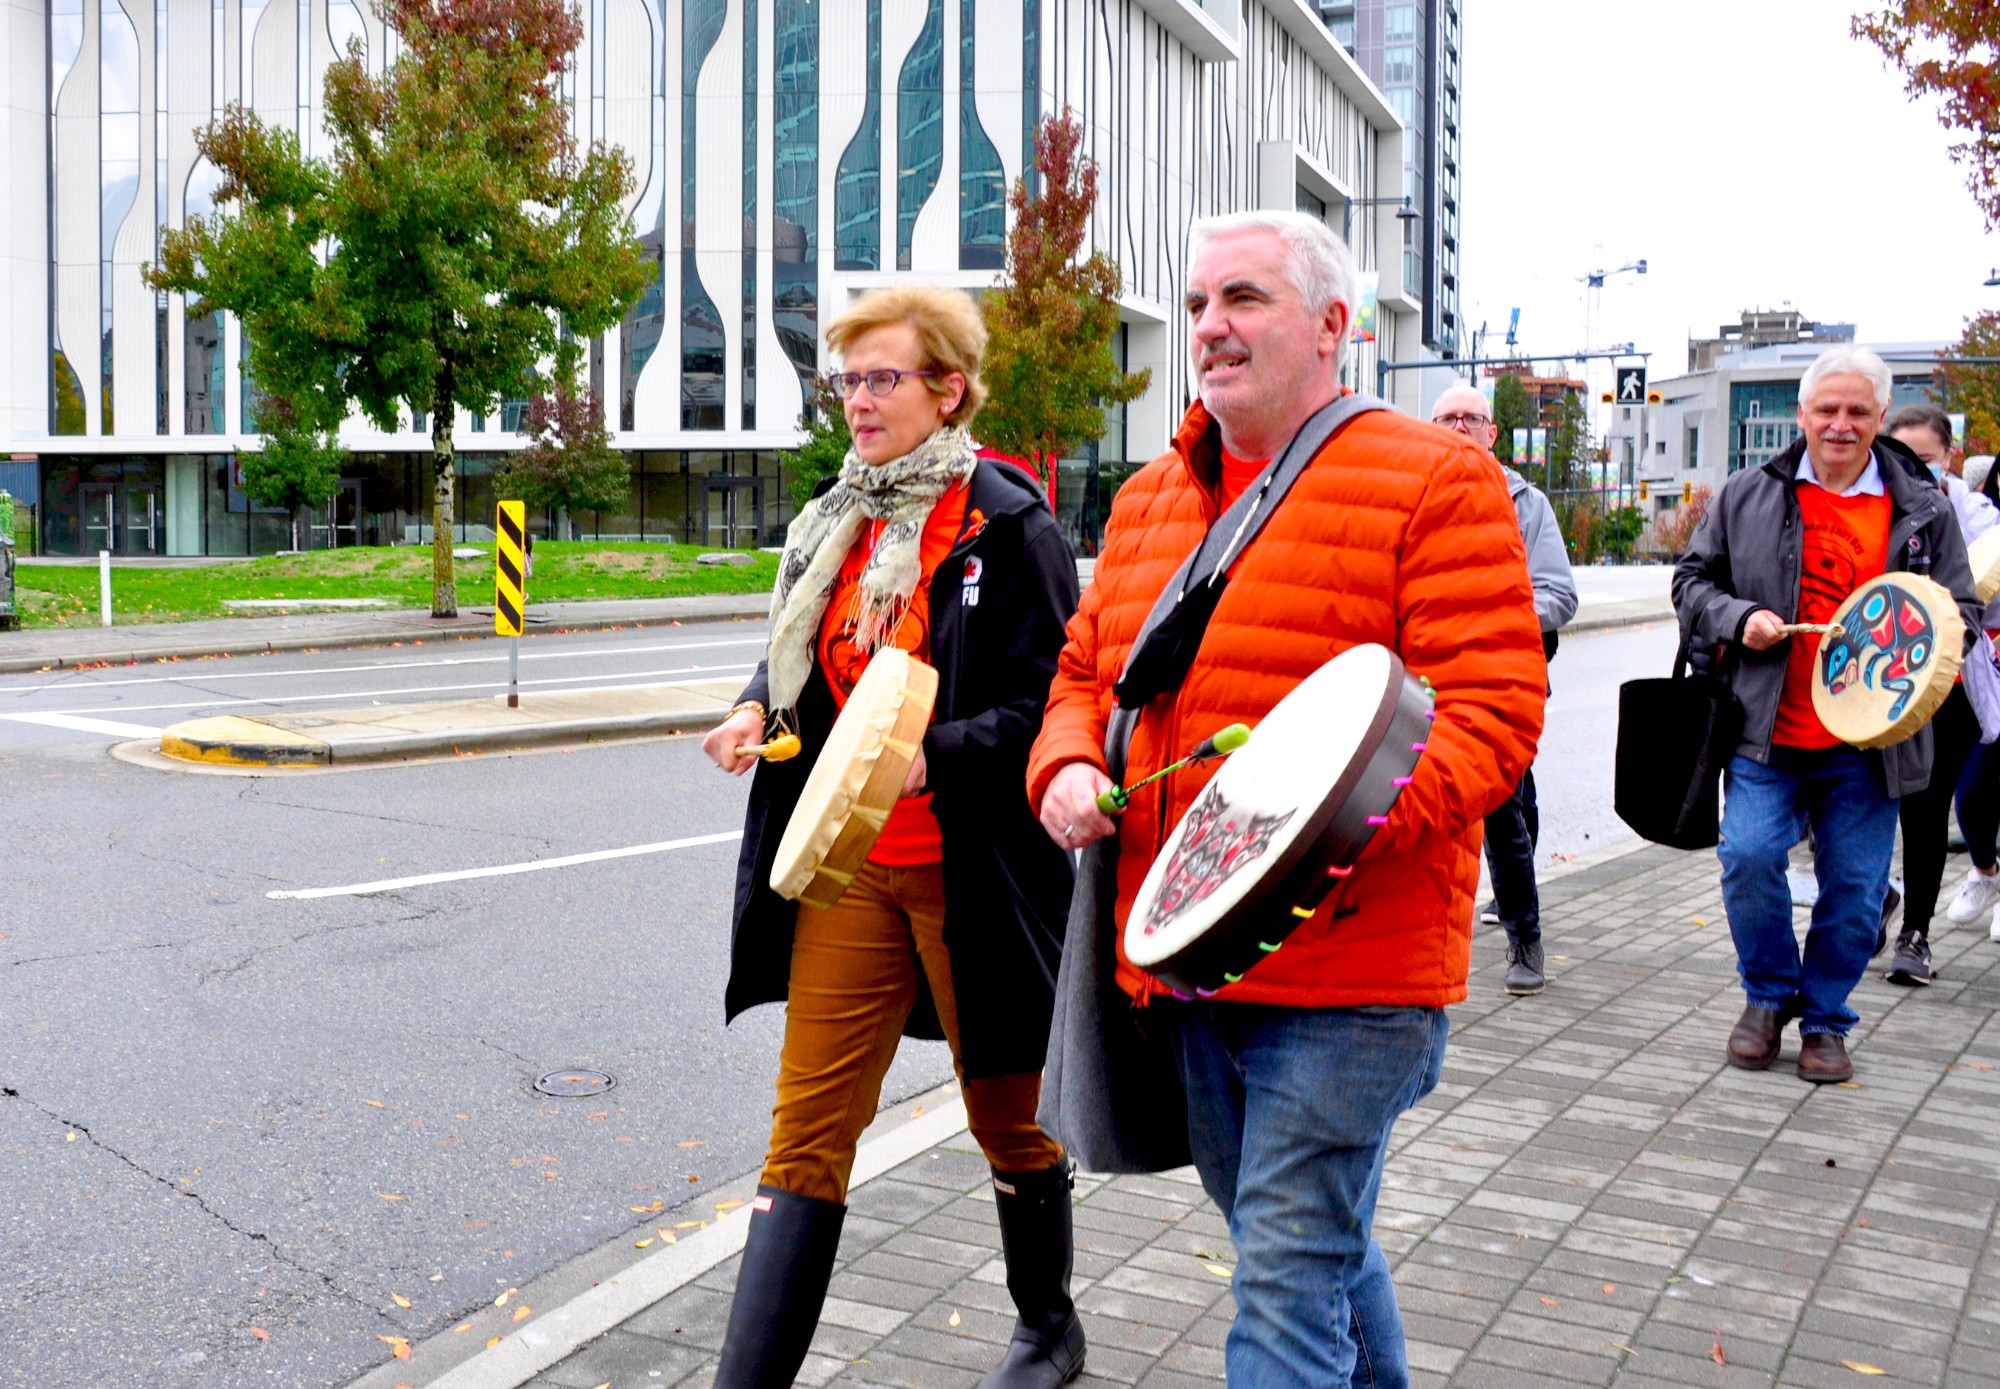 SFU President Joy Johnson and Surrey campus Executive Director Steve Dooley joined a drumming procession from Surrey City Hall to Holland Park